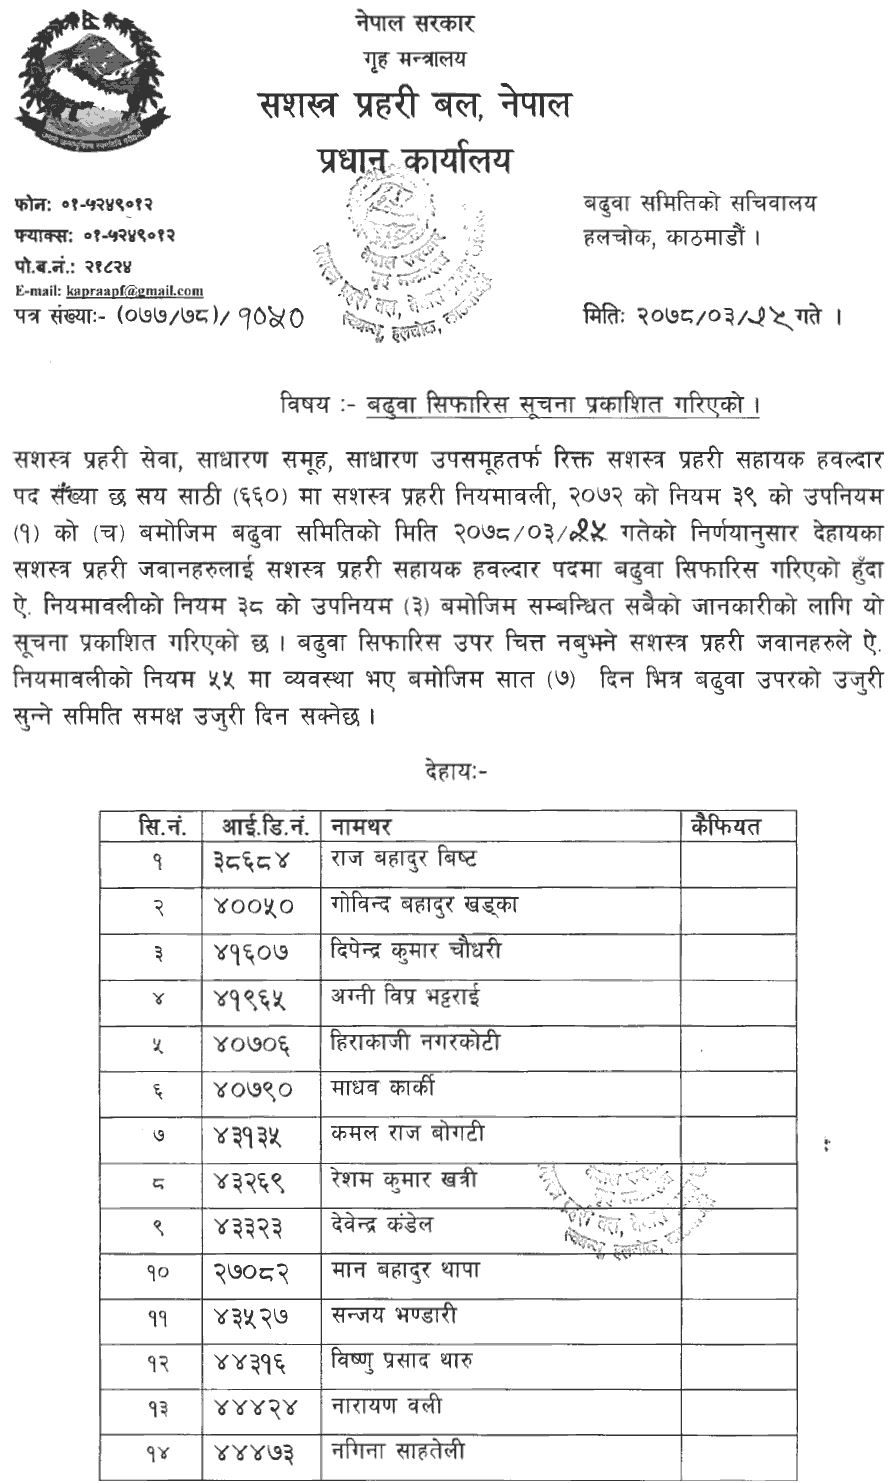 APF Nepal Published List of Promotion Recommendation for Assistant Constable Post